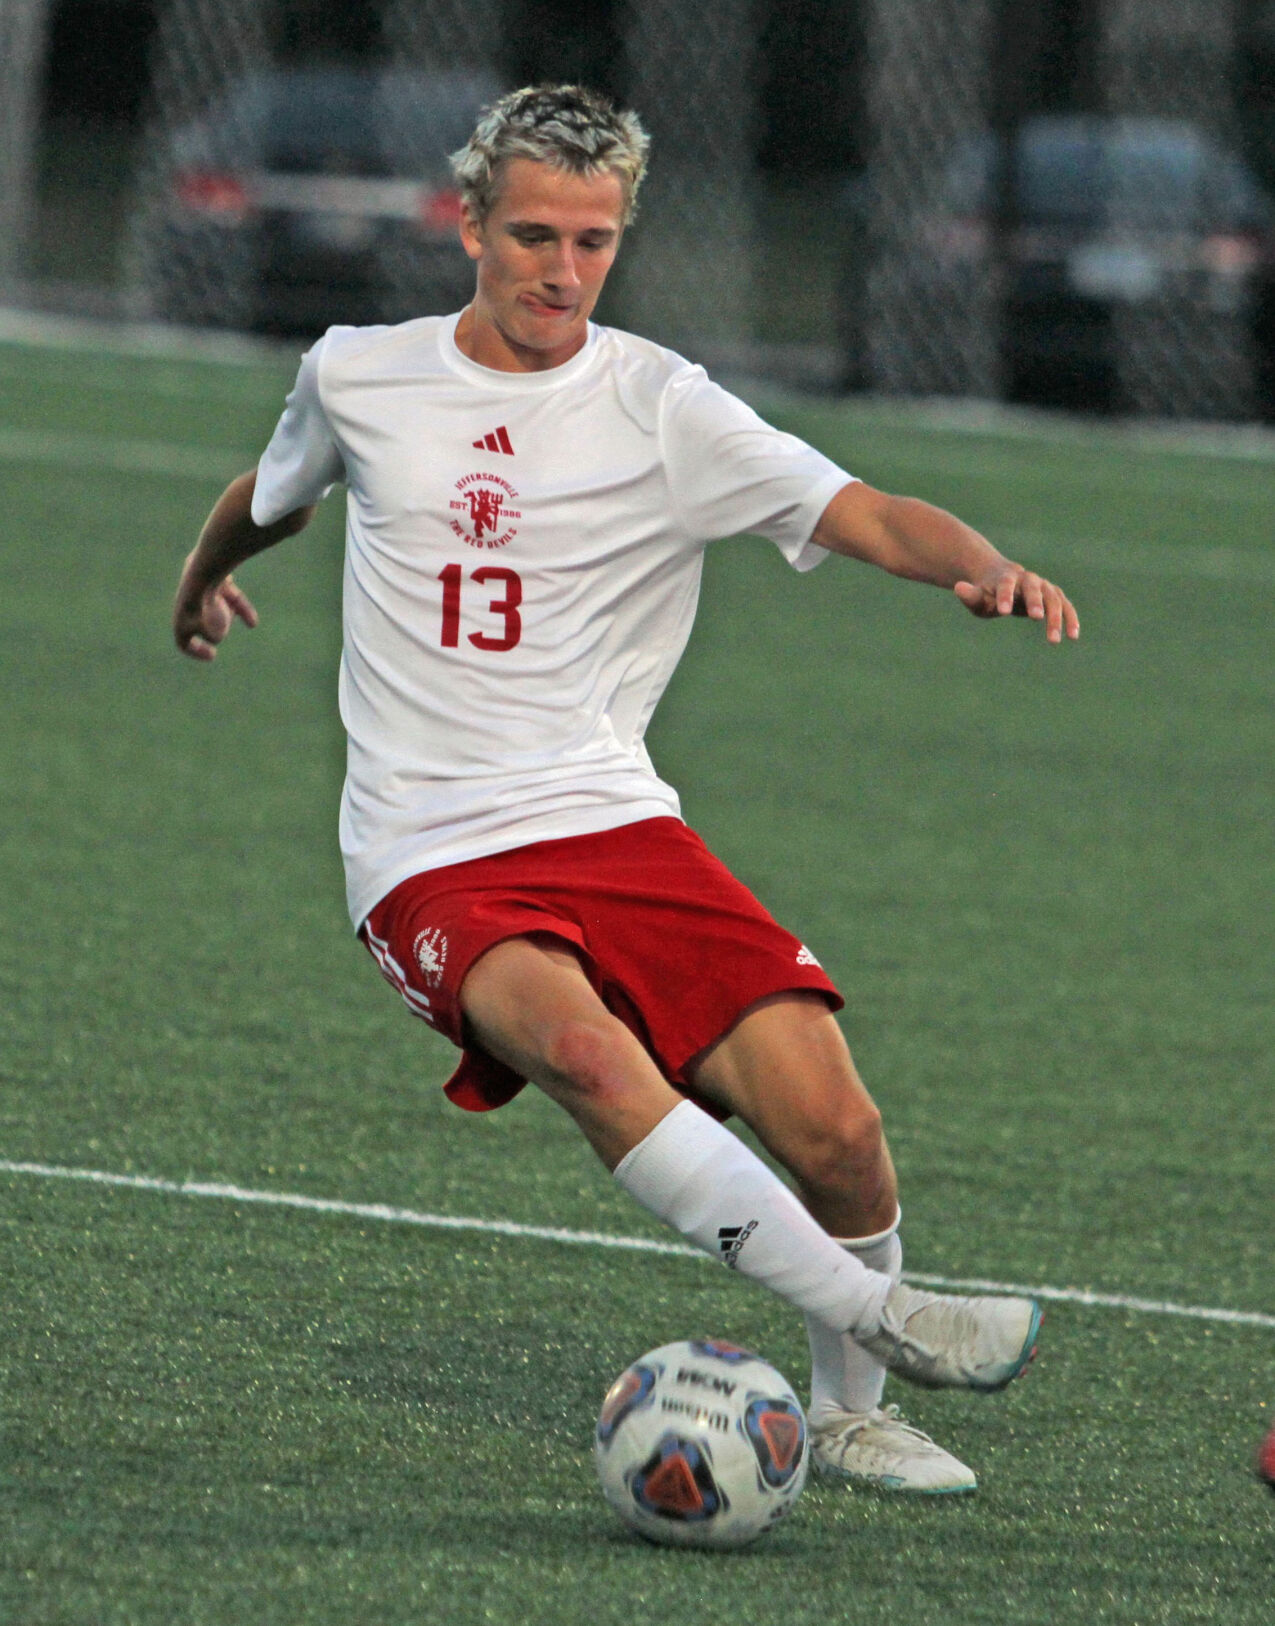 BOYS’ SOCCER: Courson’s hat trick helps Devils down Panthers